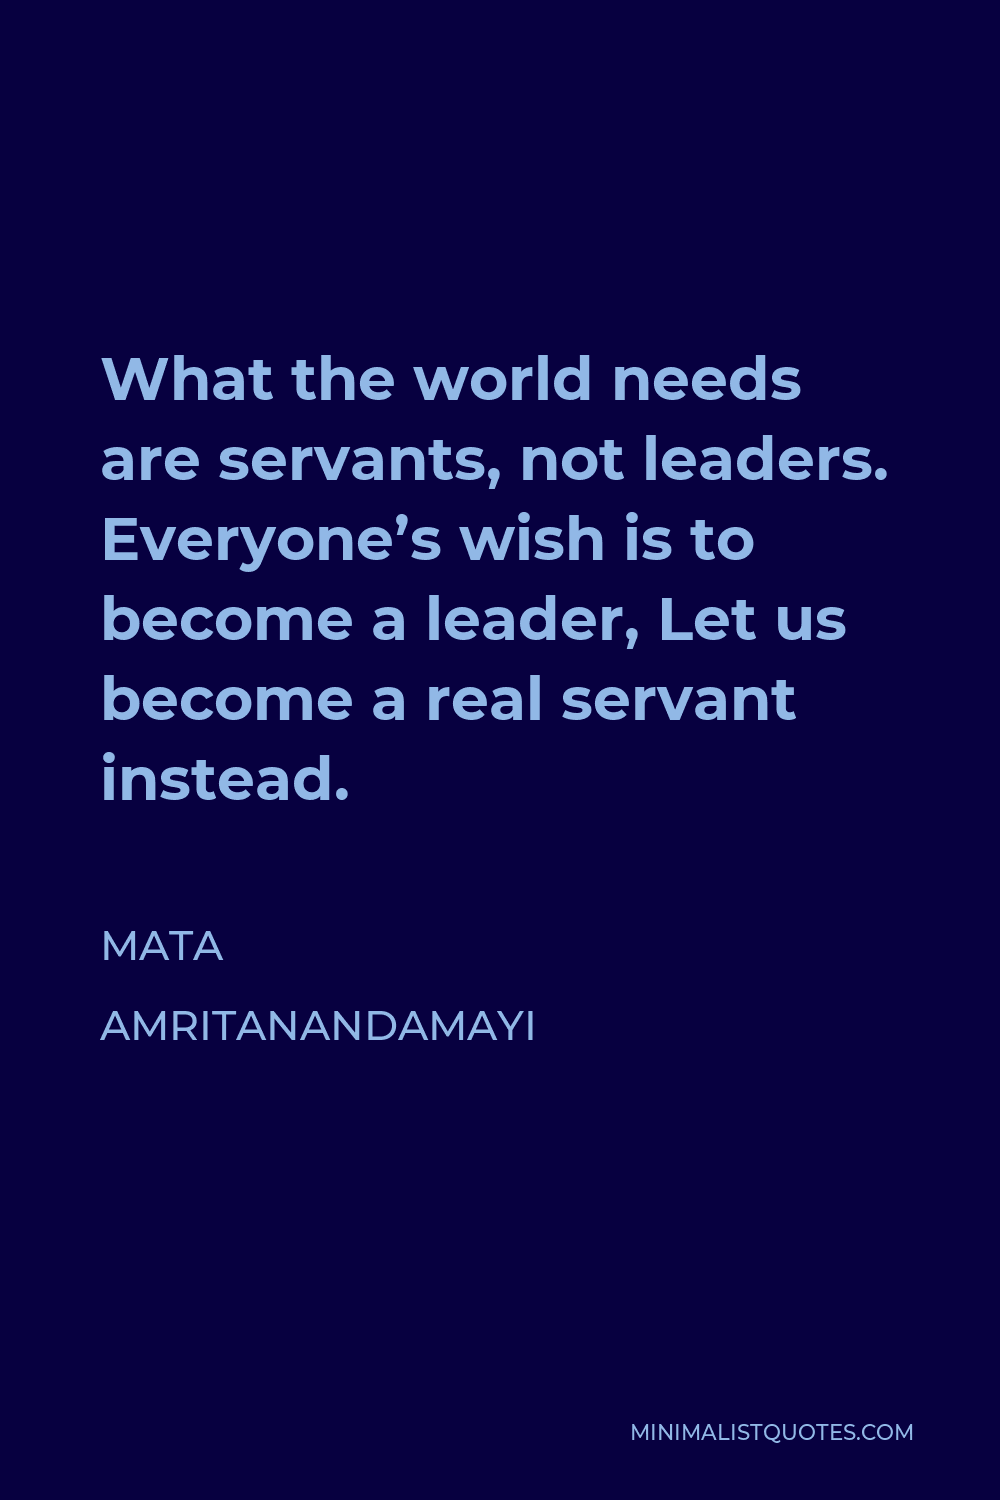 Mata Amritanandamayi Quote - What the world needs are servants, not leaders. Everyone’s wish is to become a leader, Let us become a real servant instead.